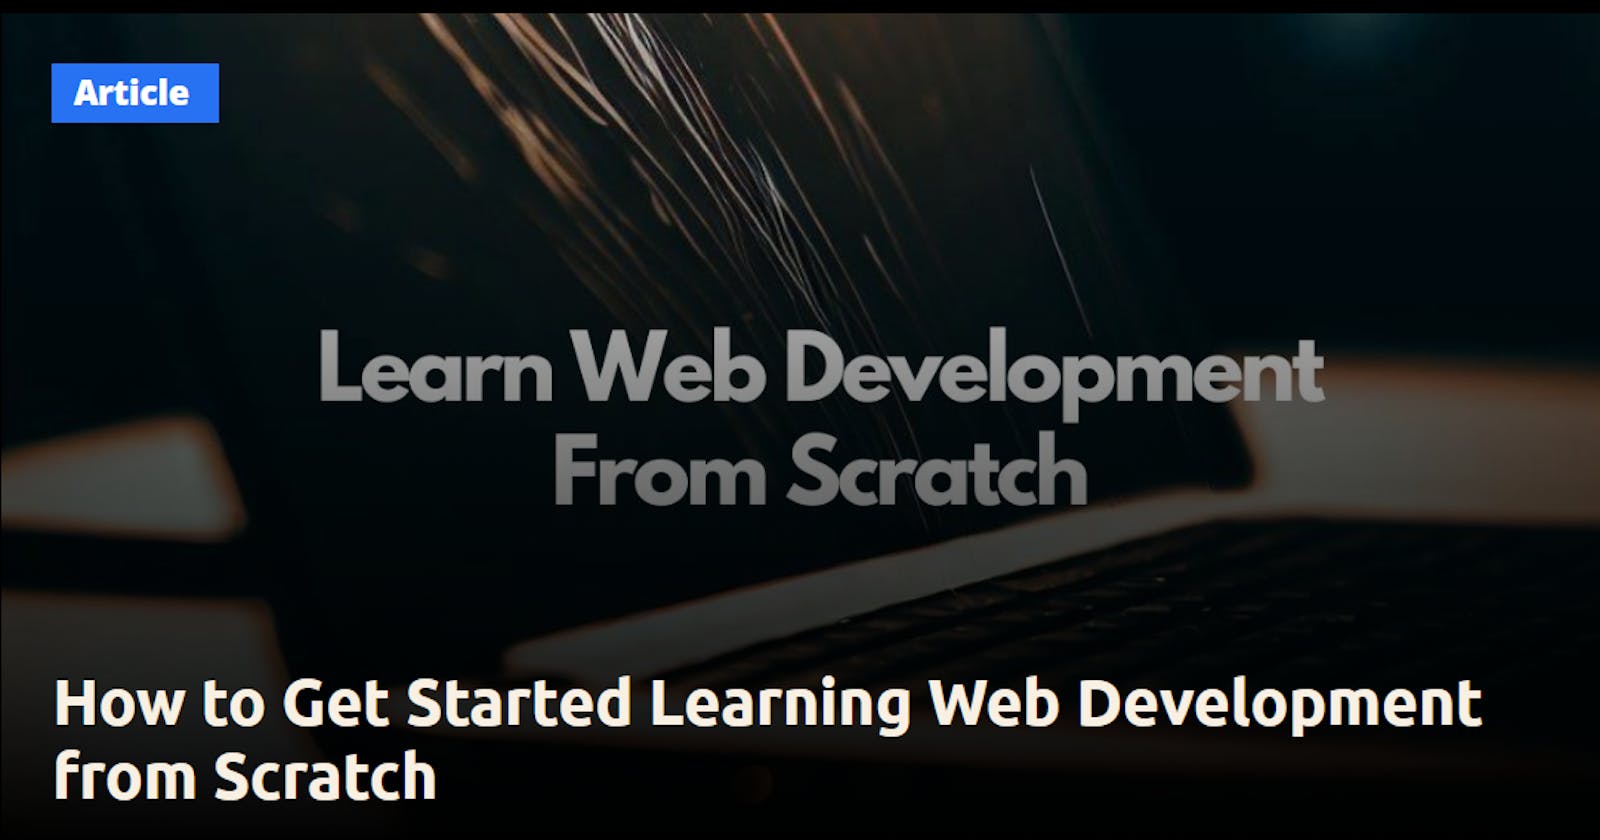 How to Get Started Learning Web Development from Scratch